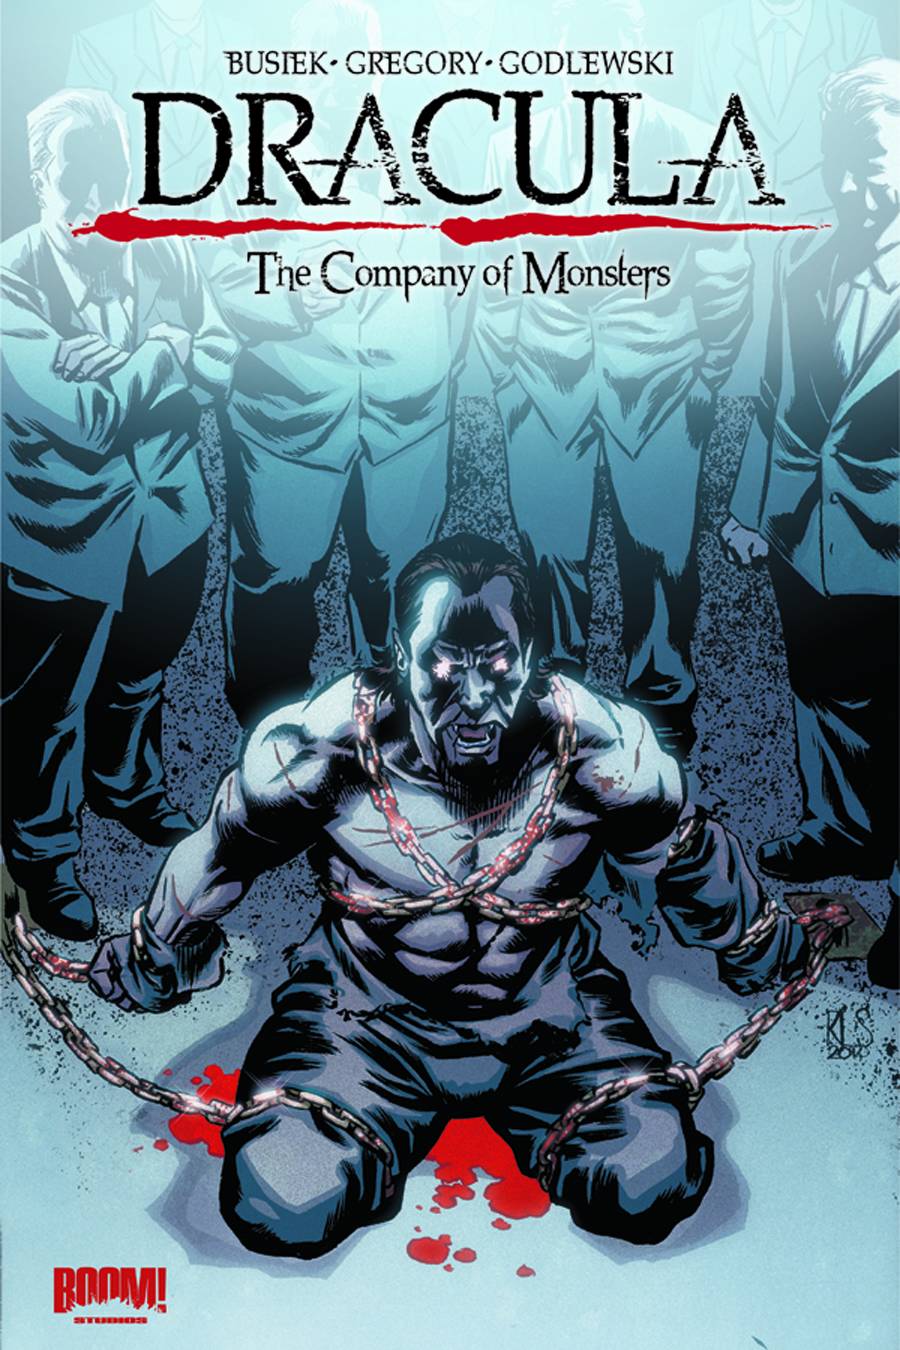 Dracula Company of Monsters Graphic Novel Volume 1